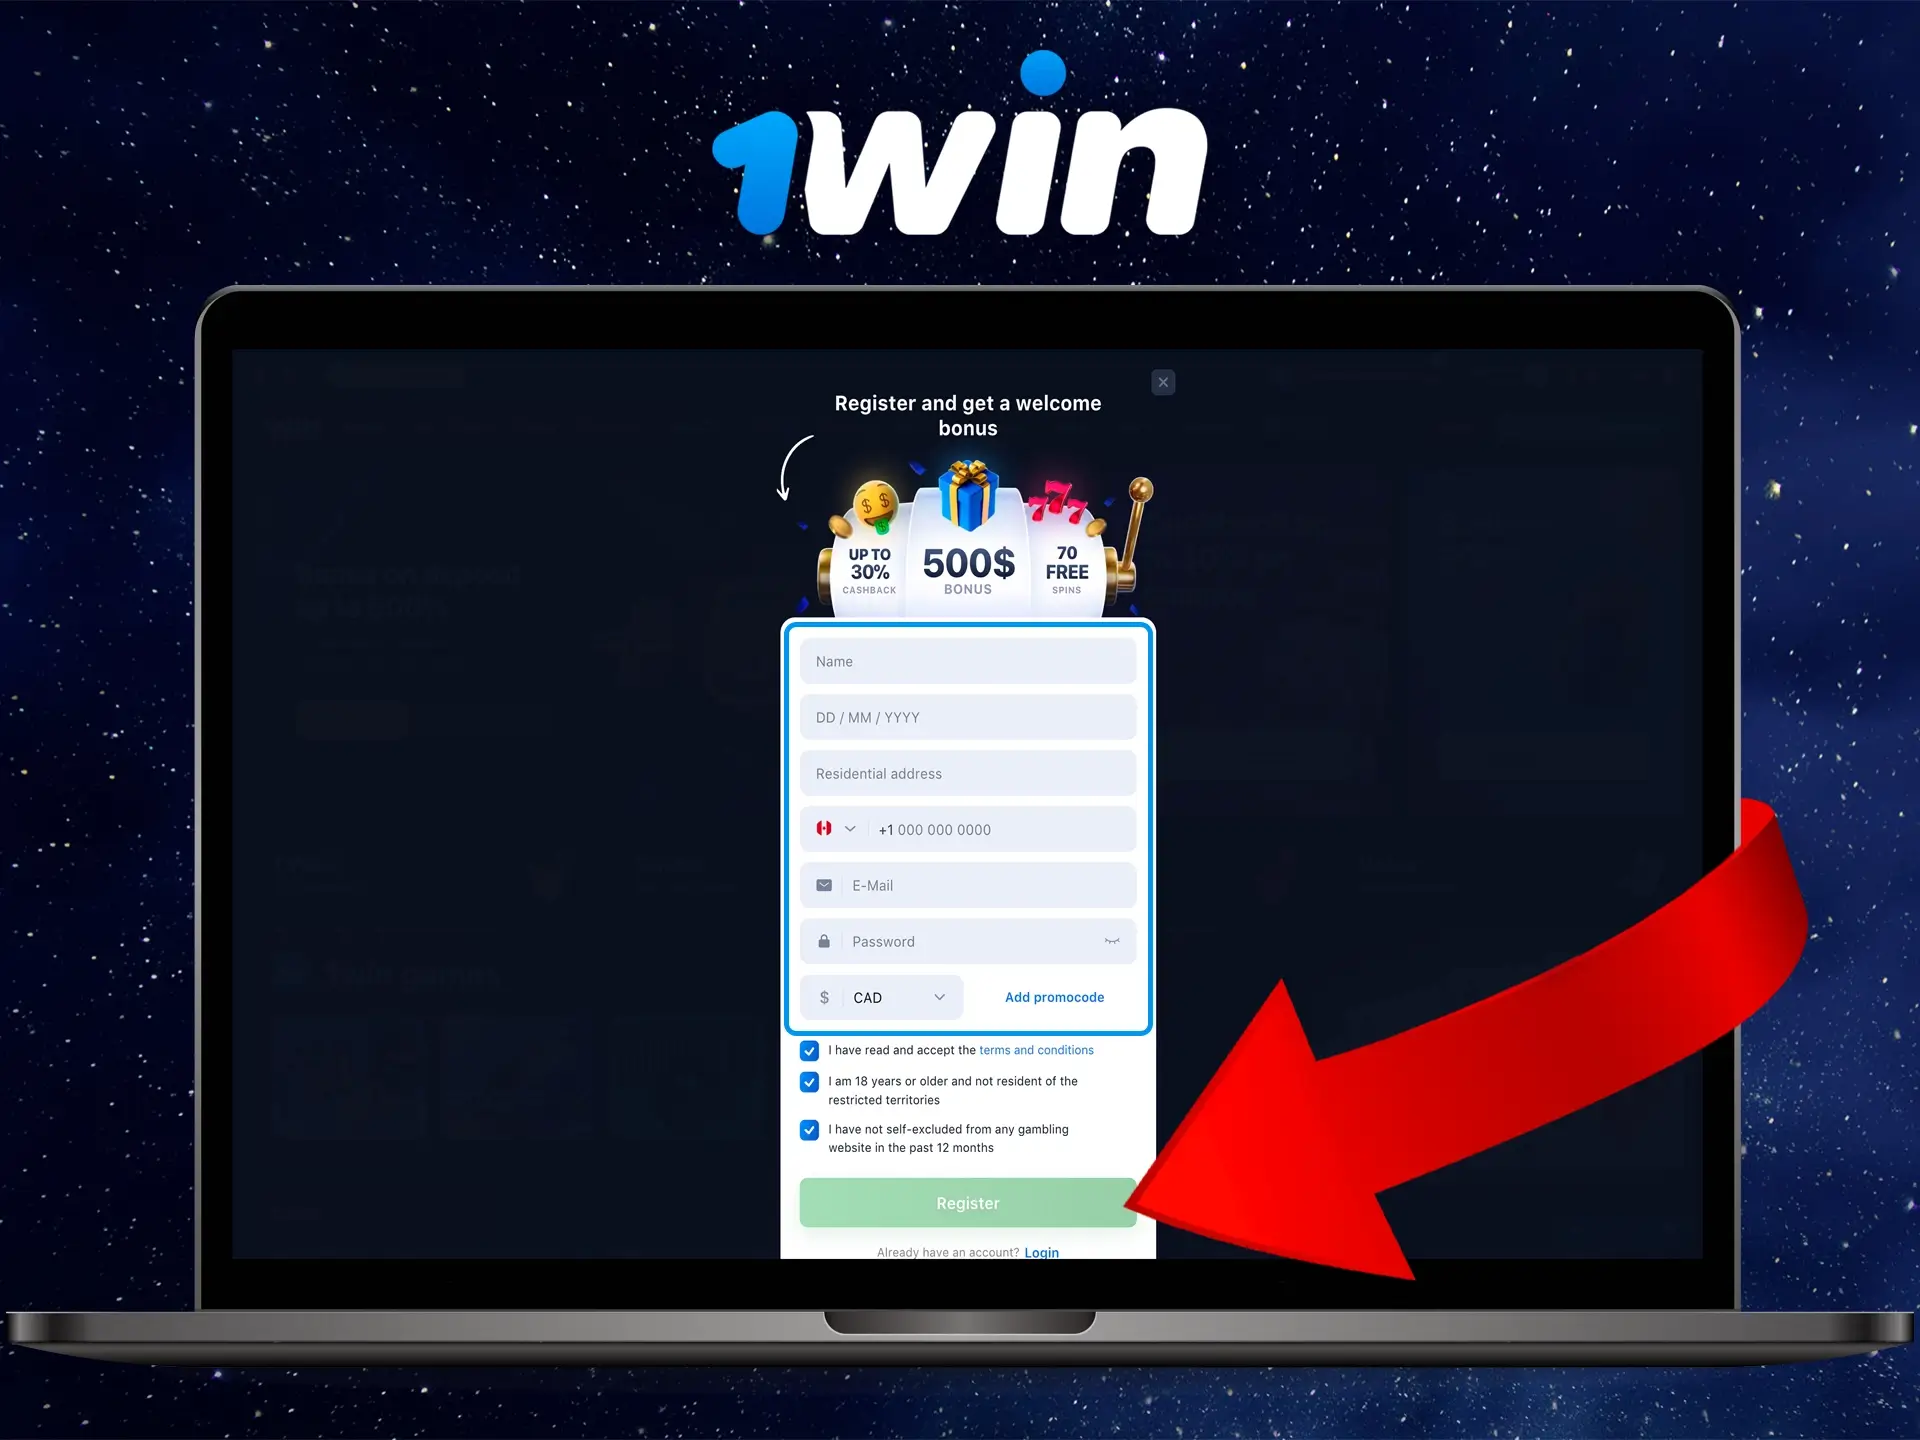 Registering on the 1Win website is very easy and will not take you long.